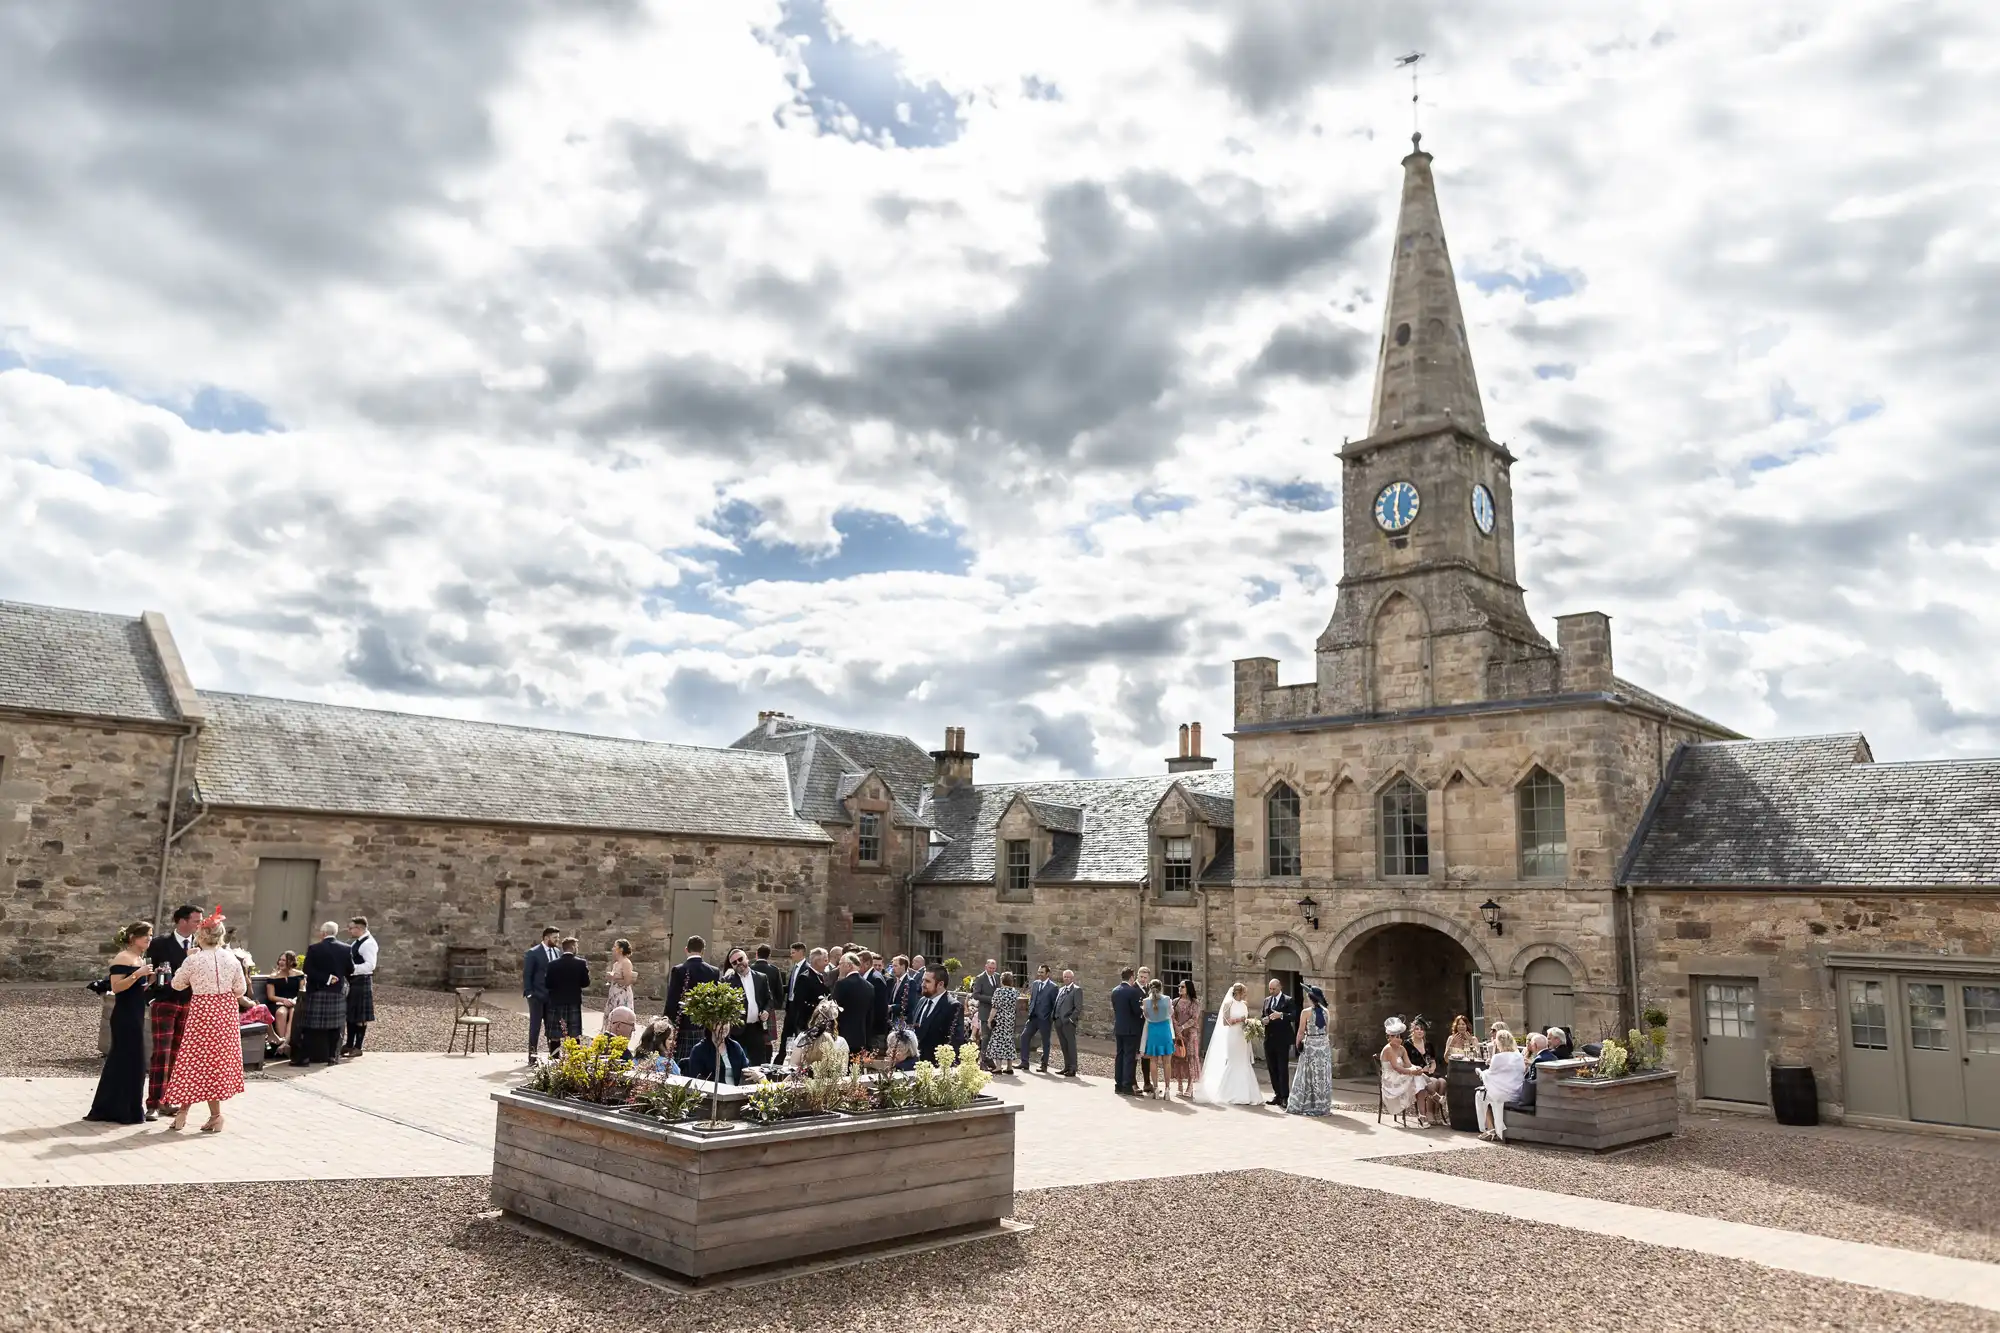 Guests gather at a spacious courtyard with historical stone buildings and a central clock tower under a partly cloudy sky.